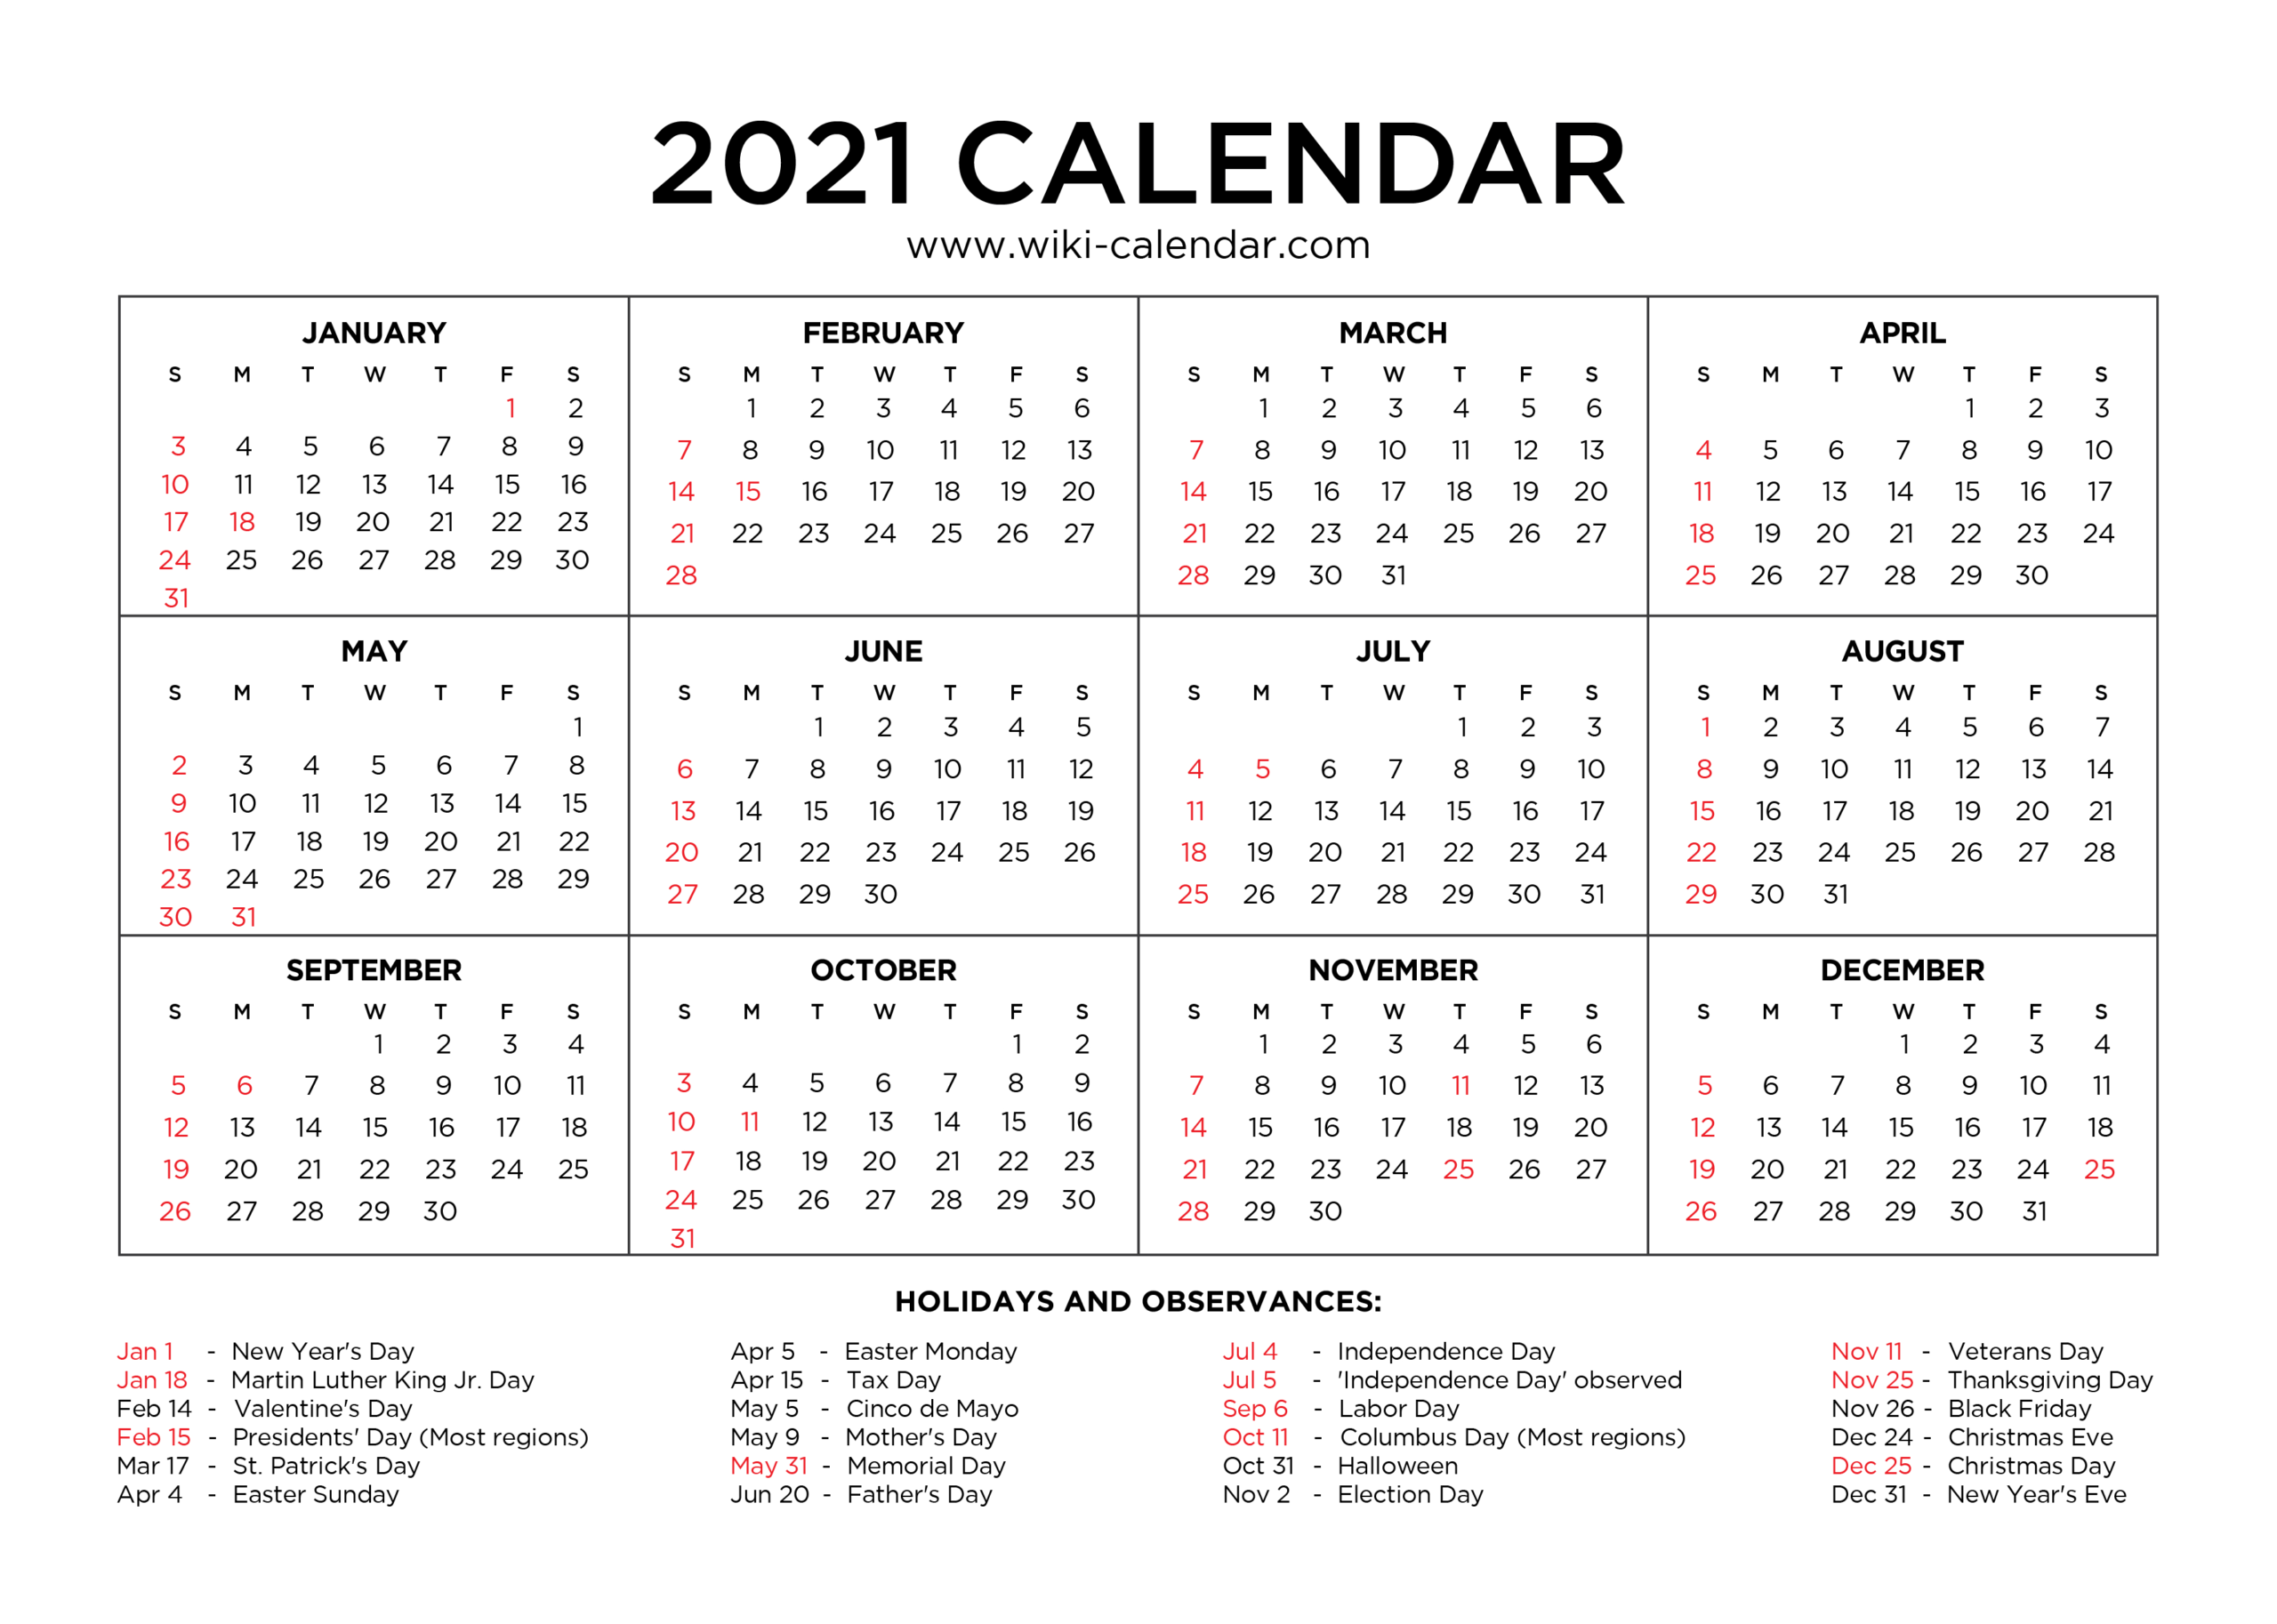 Download And Print Calendars For 2021 - Wiki Calendar-Free 2021 Queensland Calender To Down Load